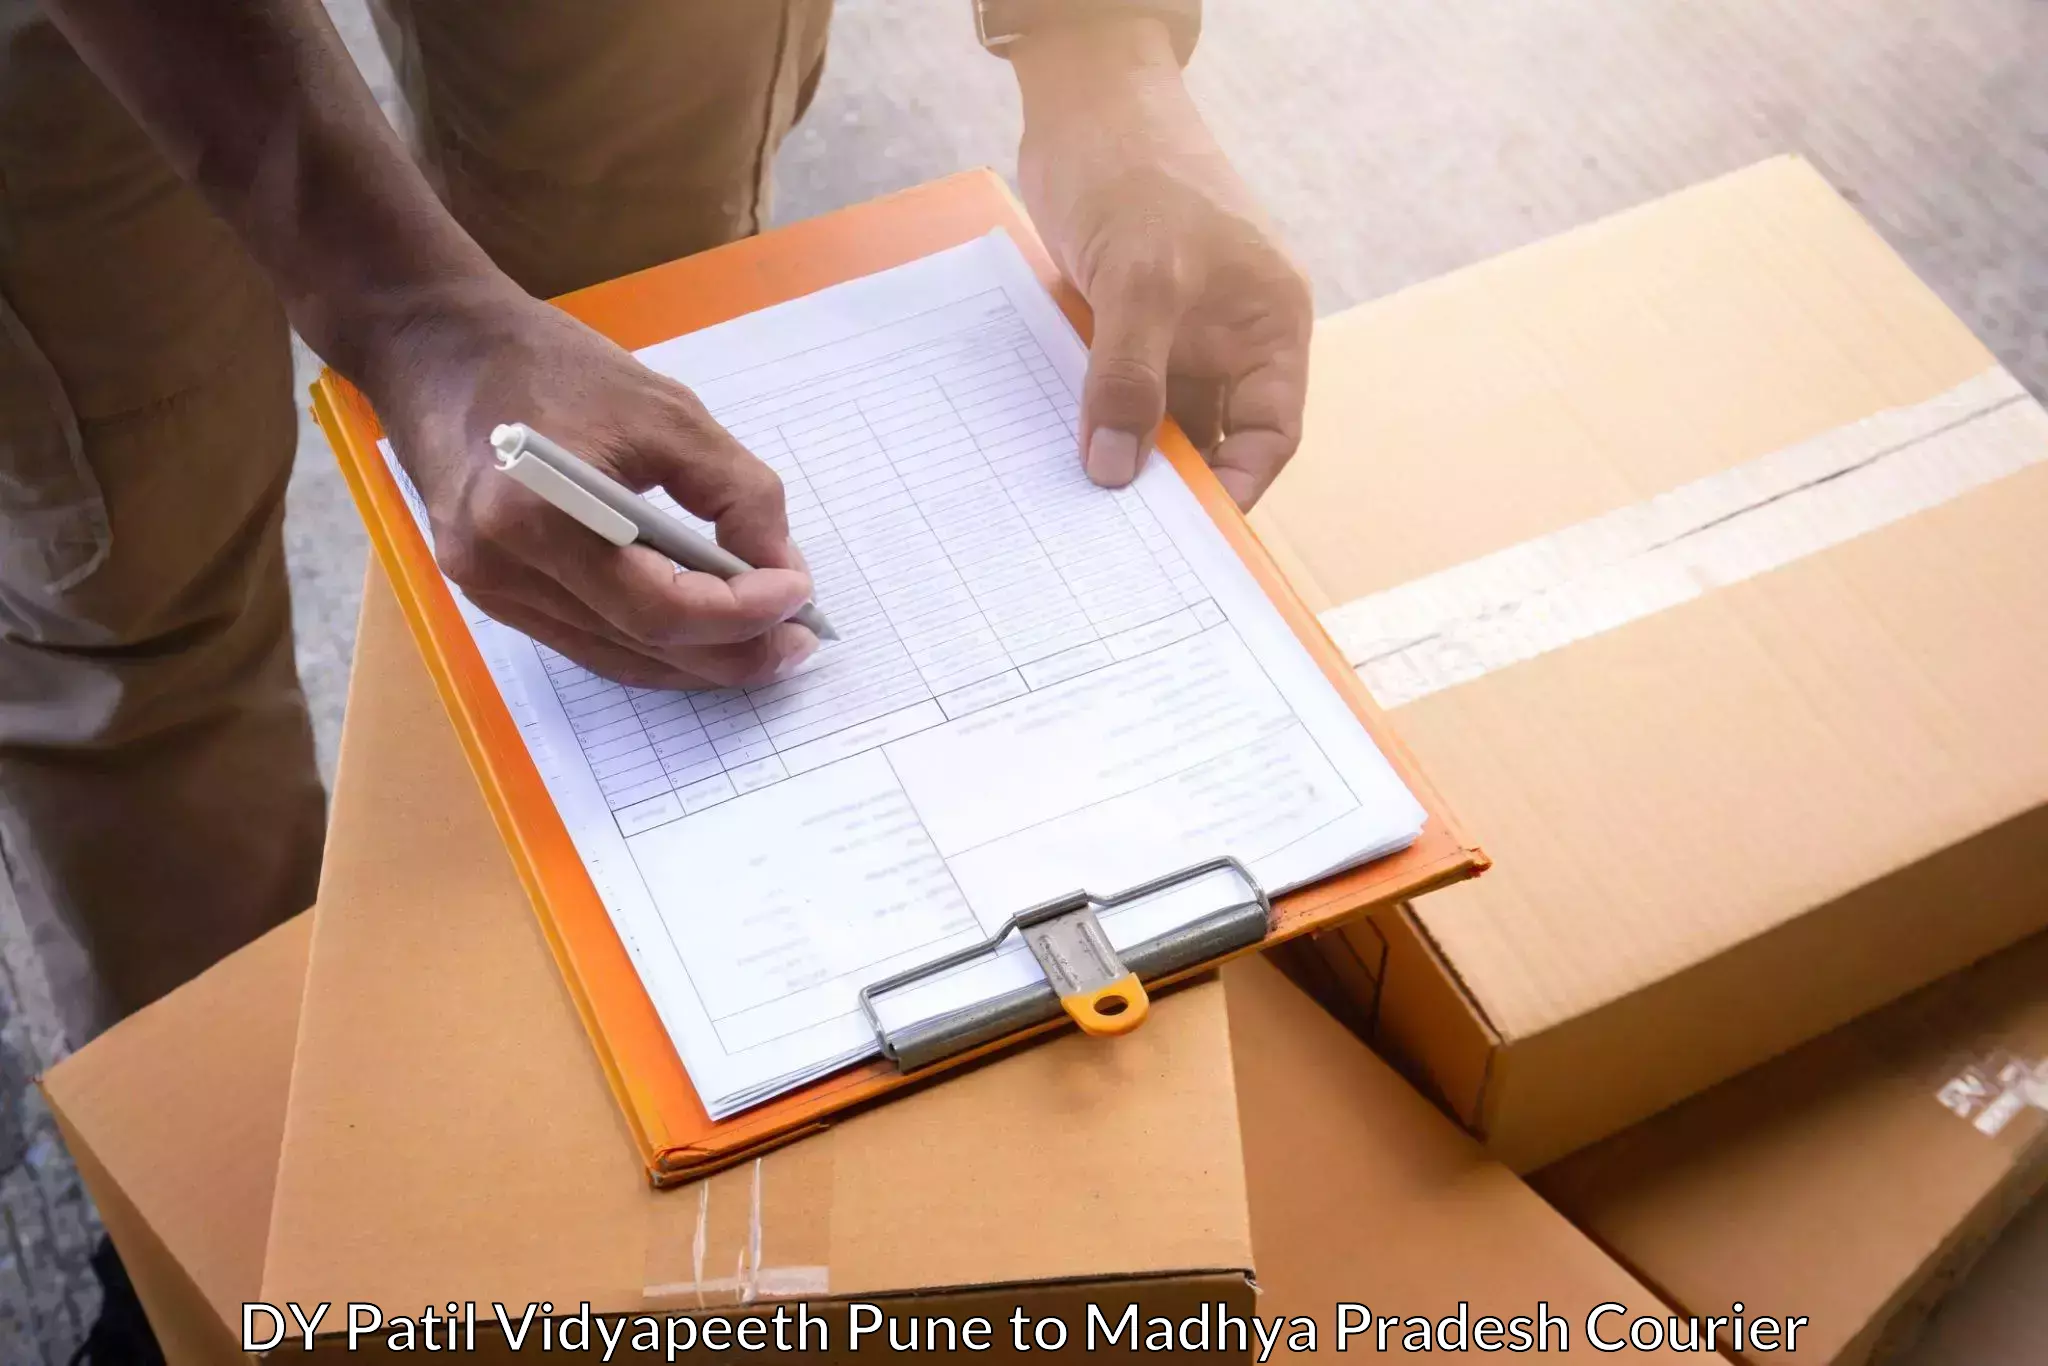 Pharmaceutical courier DY Patil Vidyapeeth Pune to Rajendragram